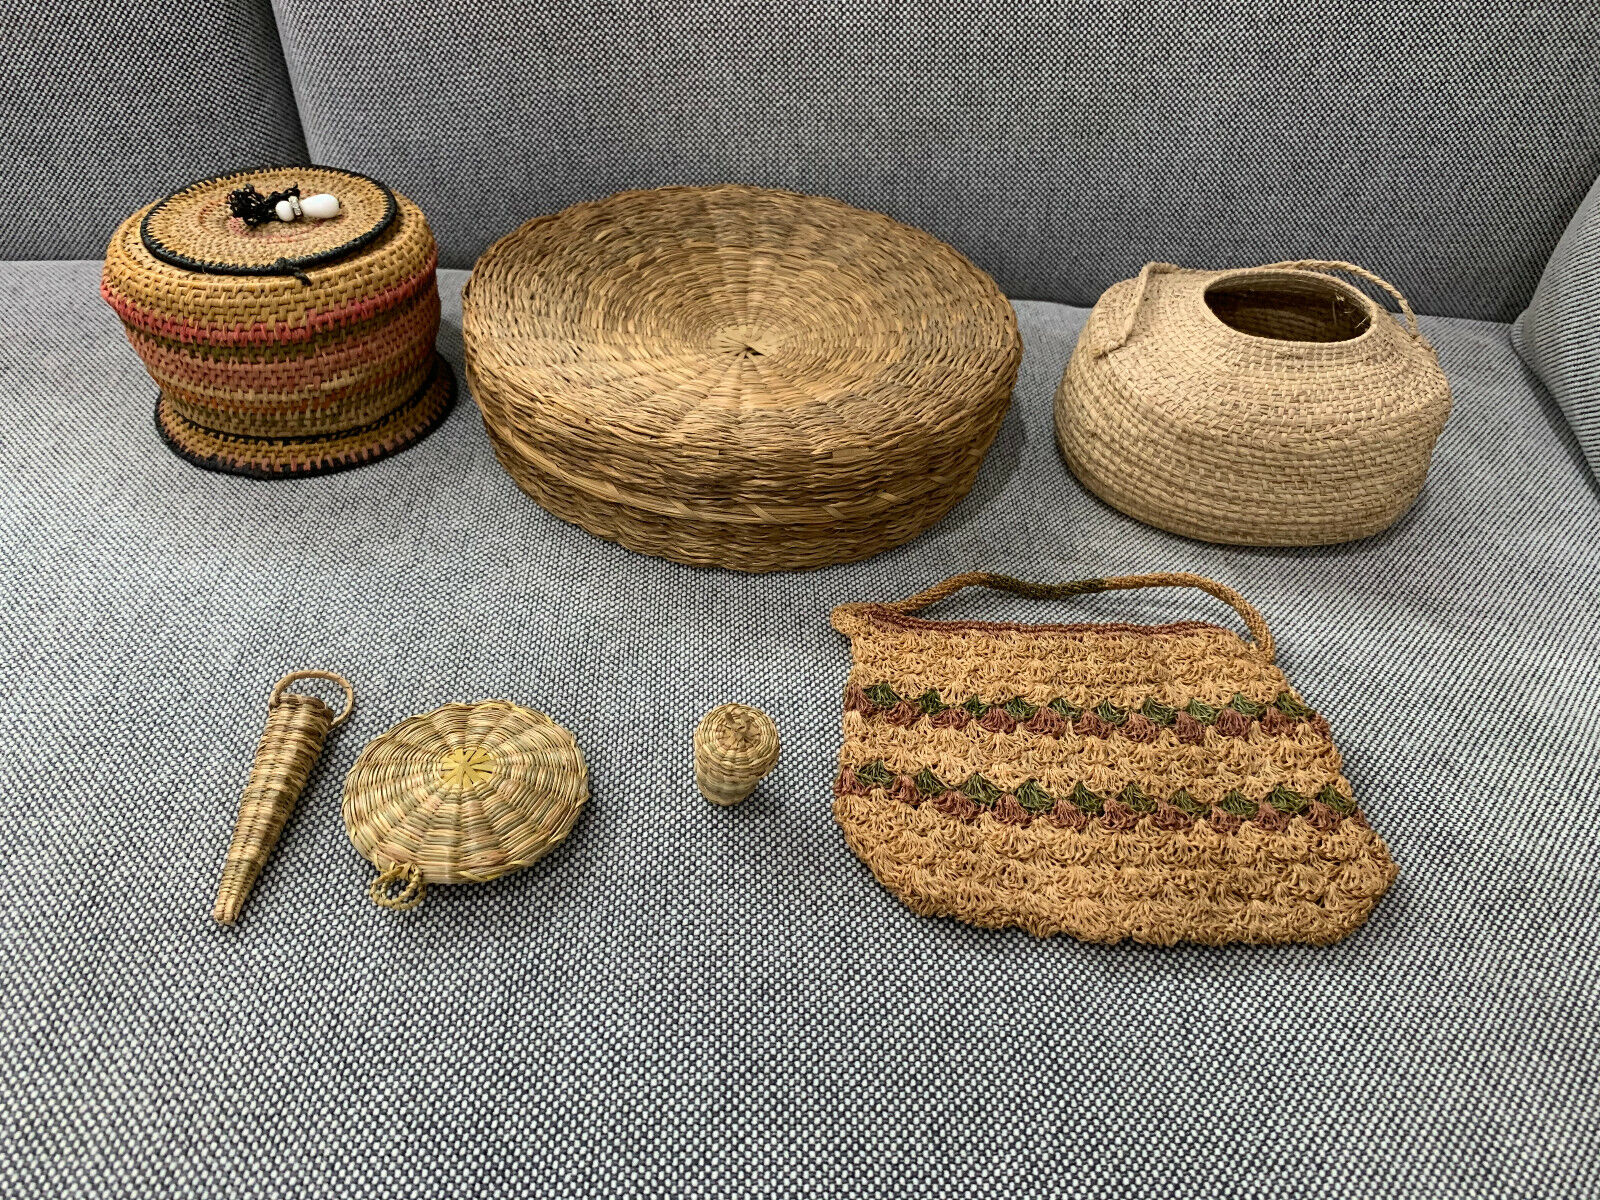 Unknown Age Lot of 7 Basket Weave Woven Items Baskets Miniatures Vase Purse